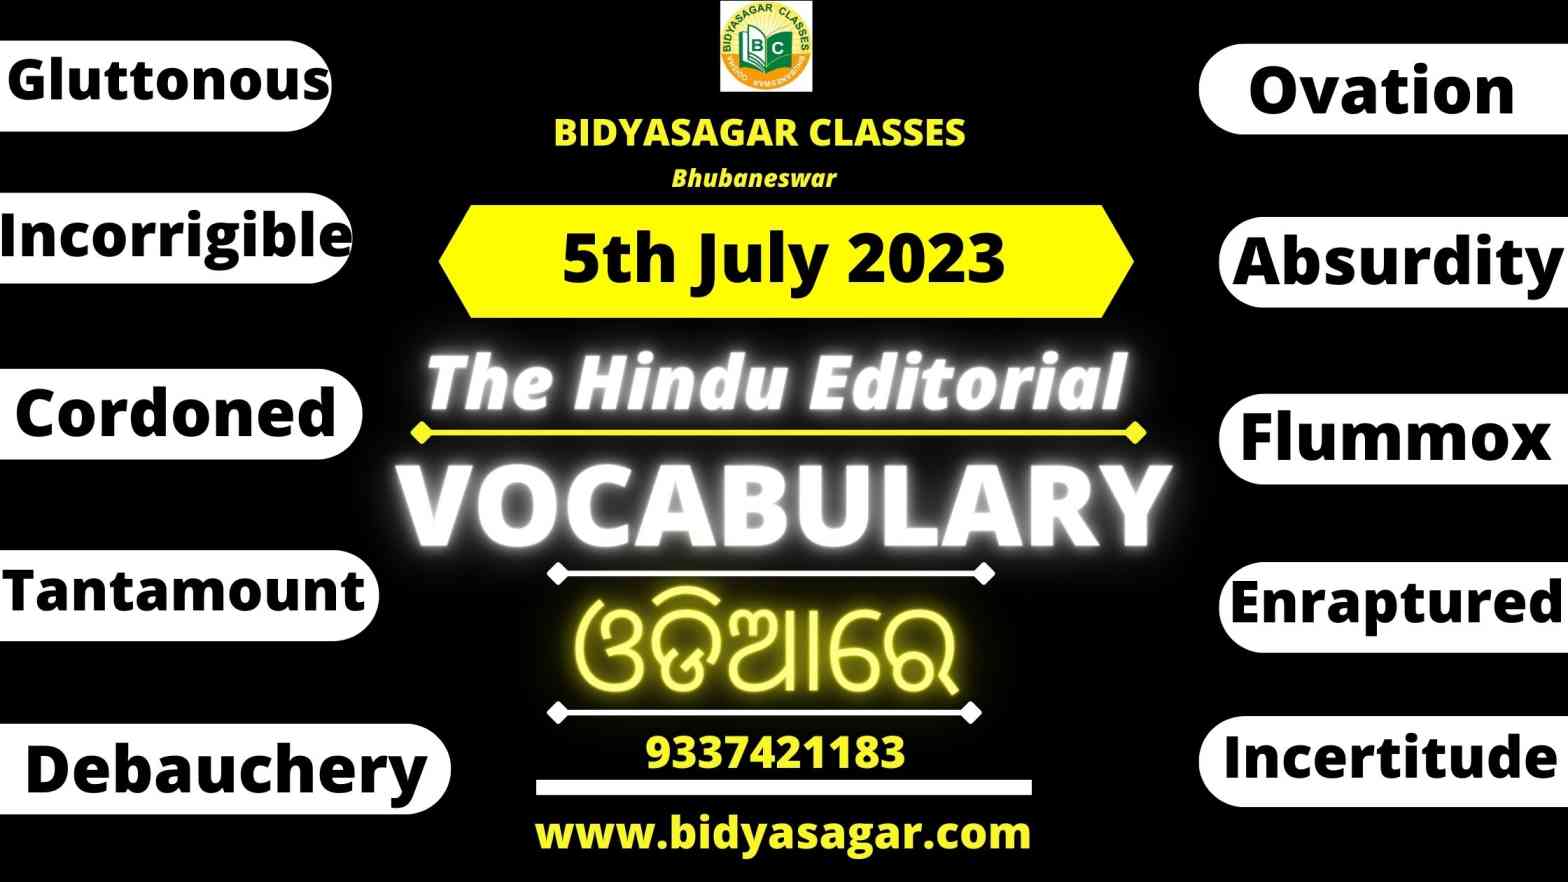 The Hindu Editorial Vocabulary of 5th July 2023